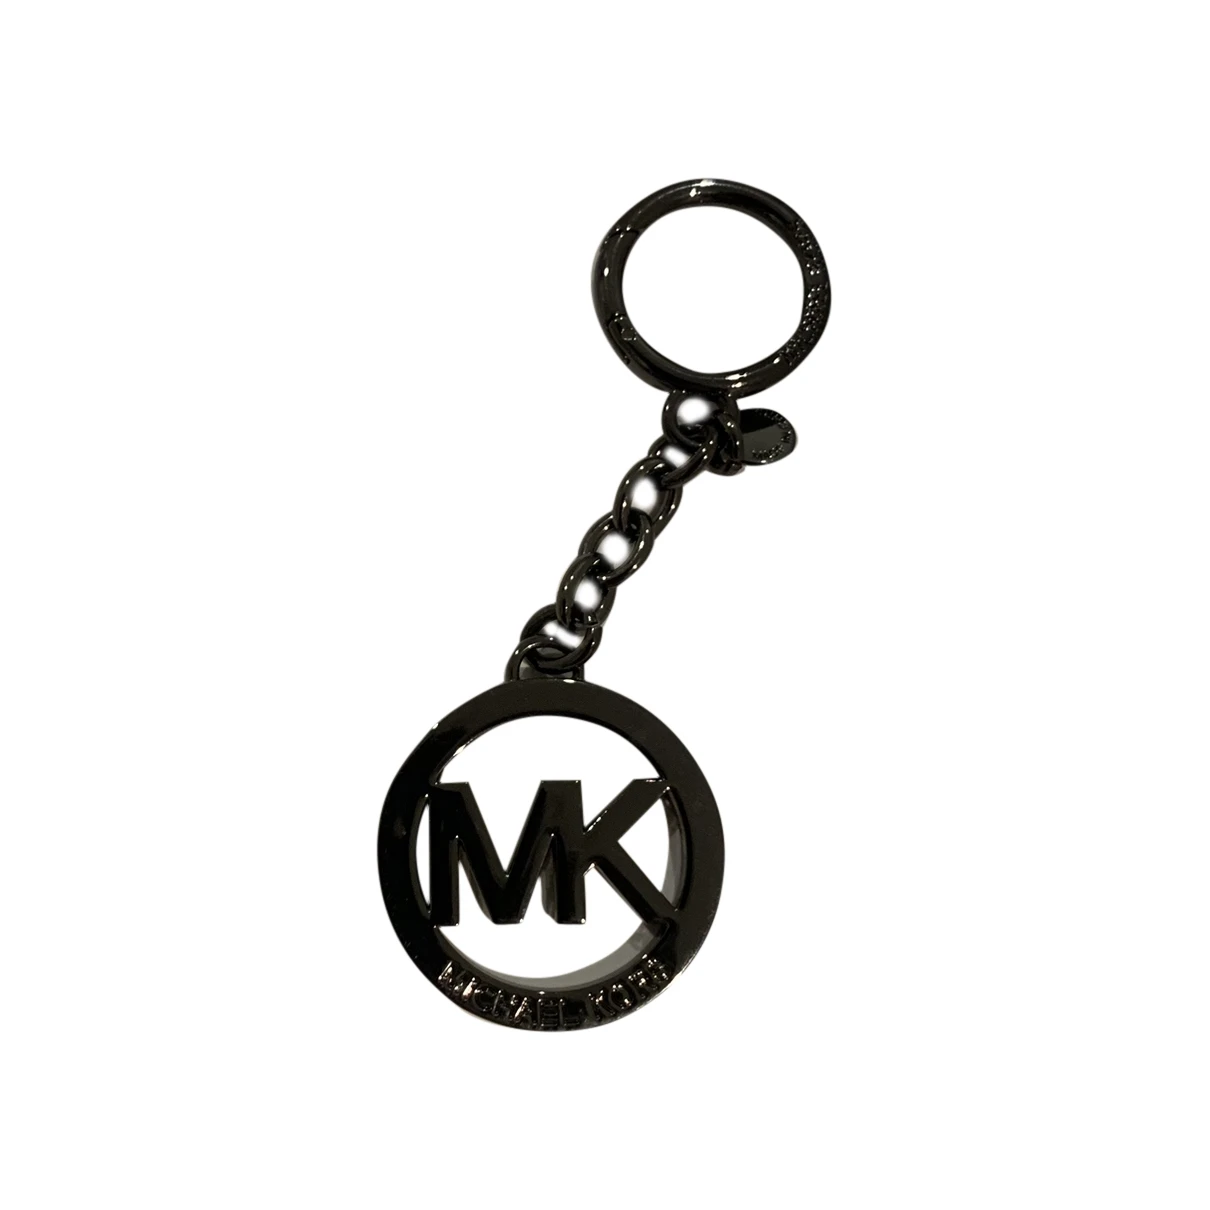 jewellery Michael Kors bag charms for Female Metal. Used condition